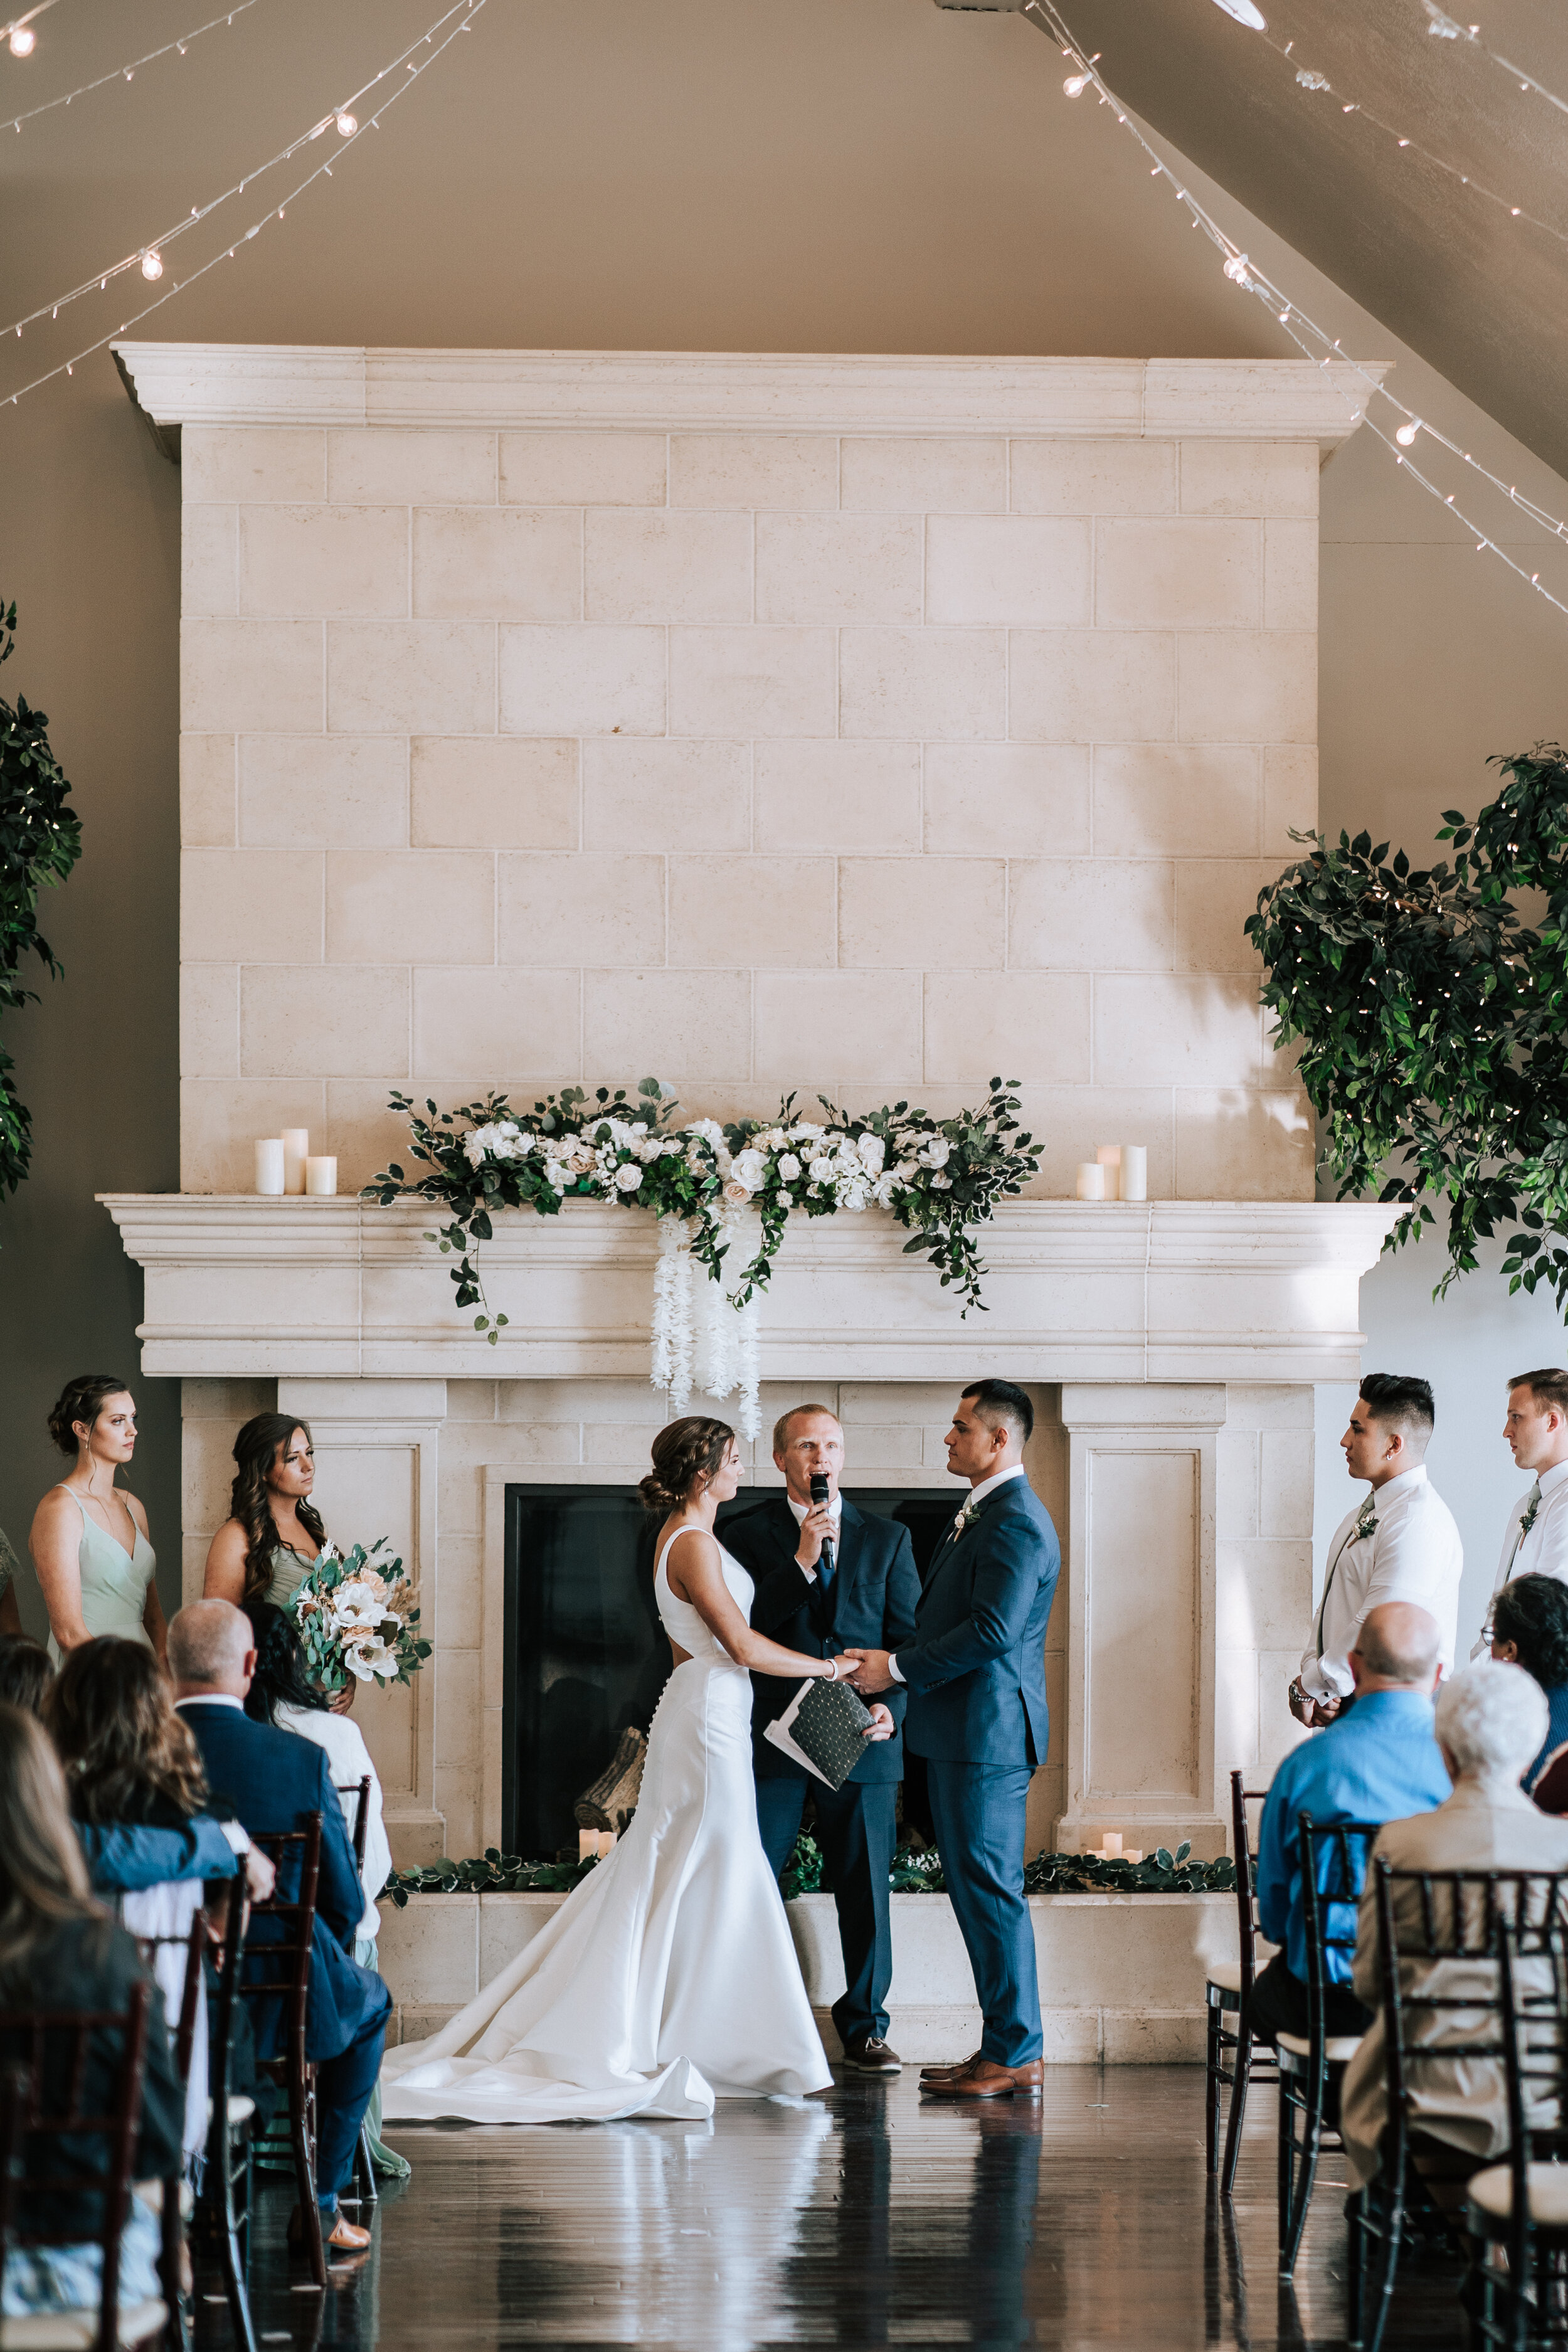  Stunning white marble fireplace is an altar for a couple holding hands with officiant speaking behind them by Emily Jenkins Photography at Sleepy Ridge in Orem. stunning indoor wedding venues in Utah mr and mrs #emilyjenkinsphotography #emilyjenkins